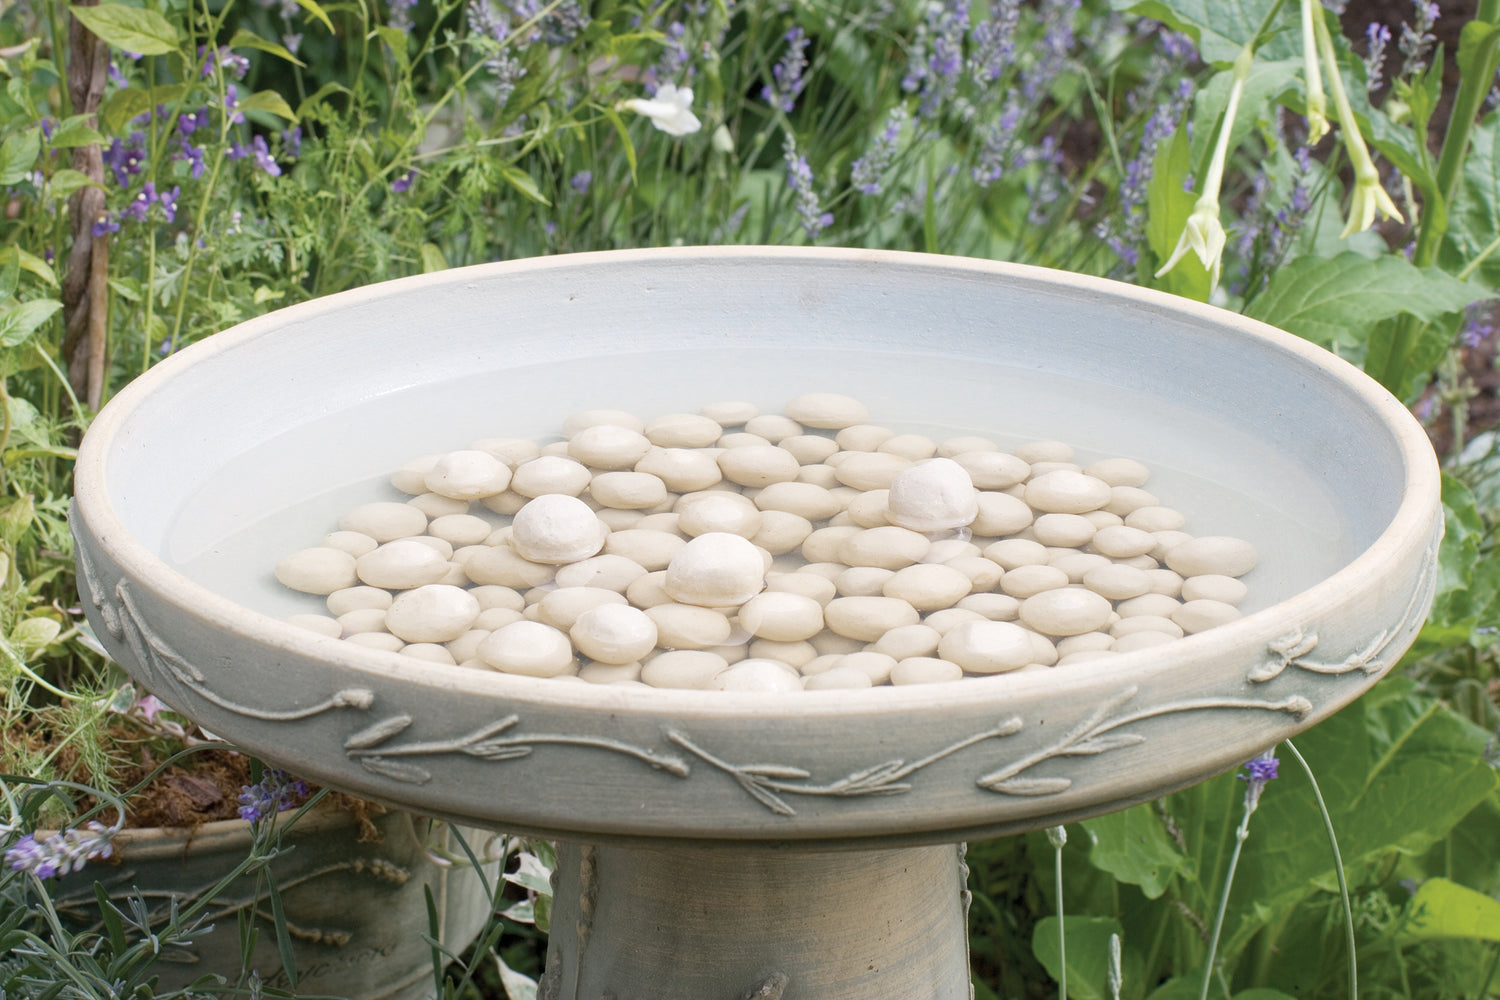 small ceramic clay balls inside a birdbath top filled with water in a garden setting